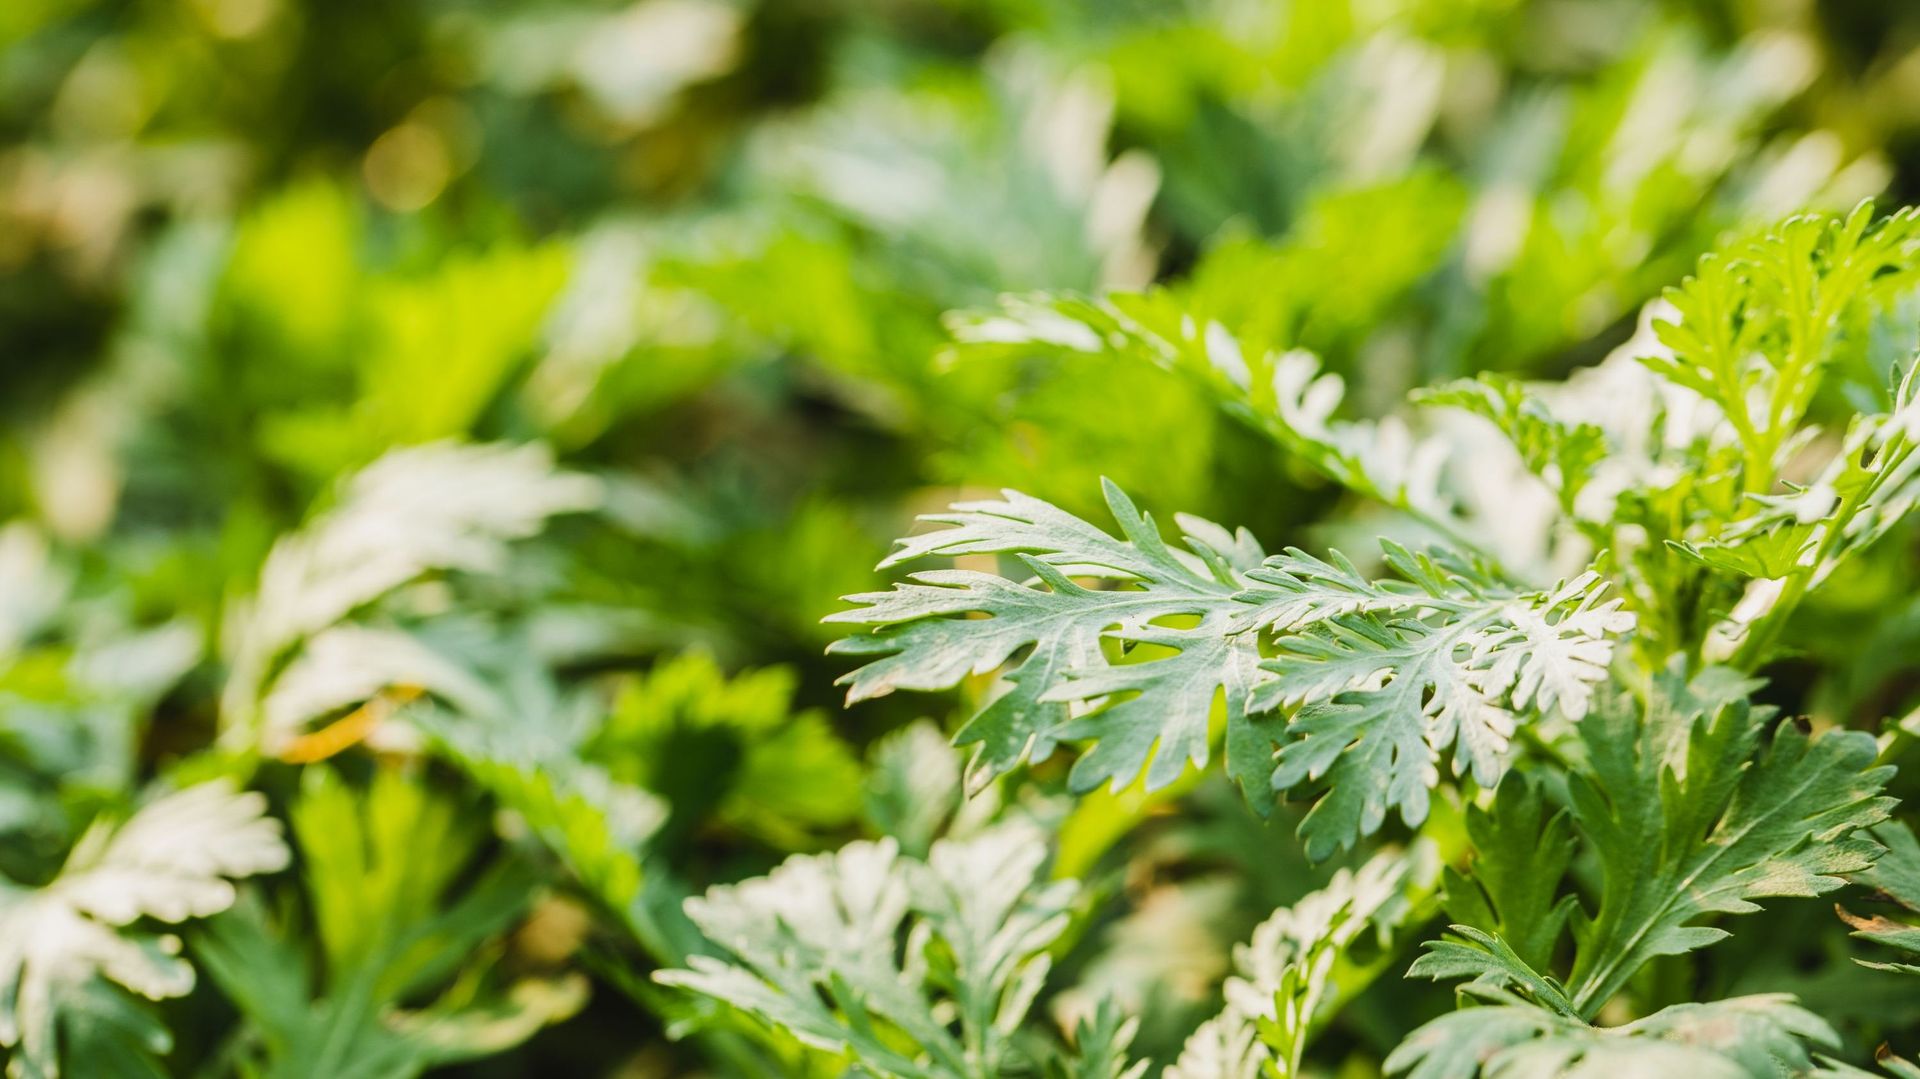 Chinese mugwort growing in the field, Chinese mugwort is widely used by Chinese as a herbal medicine